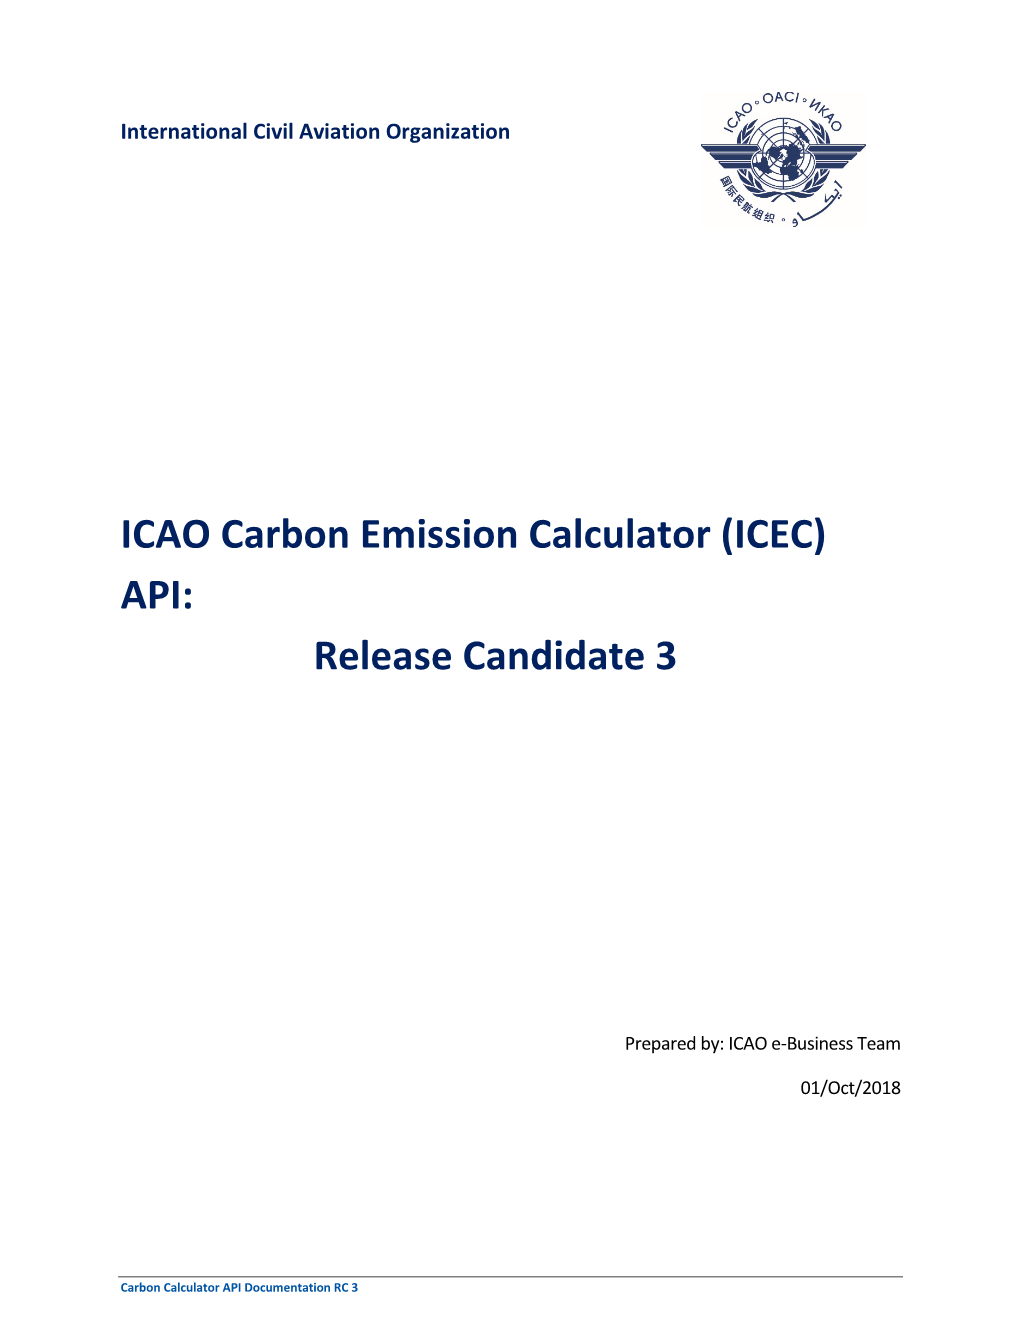 ICAO Carbon Emission Calculator (ICEC) API: Release Candidate 3